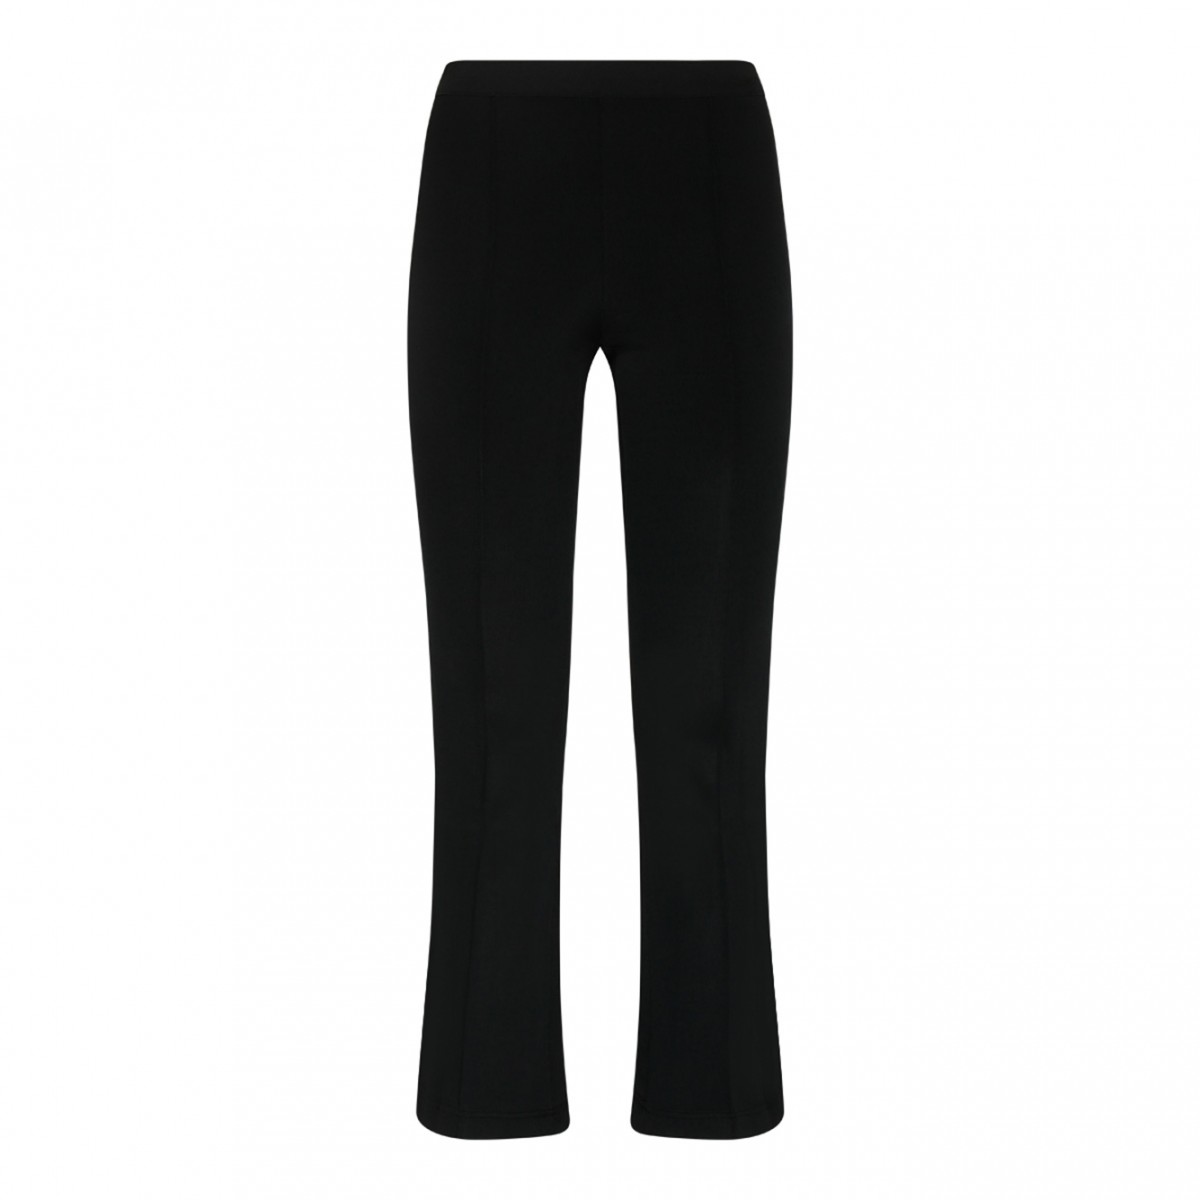 Helmut Lang Black Cropped Flare Rib Trousers.